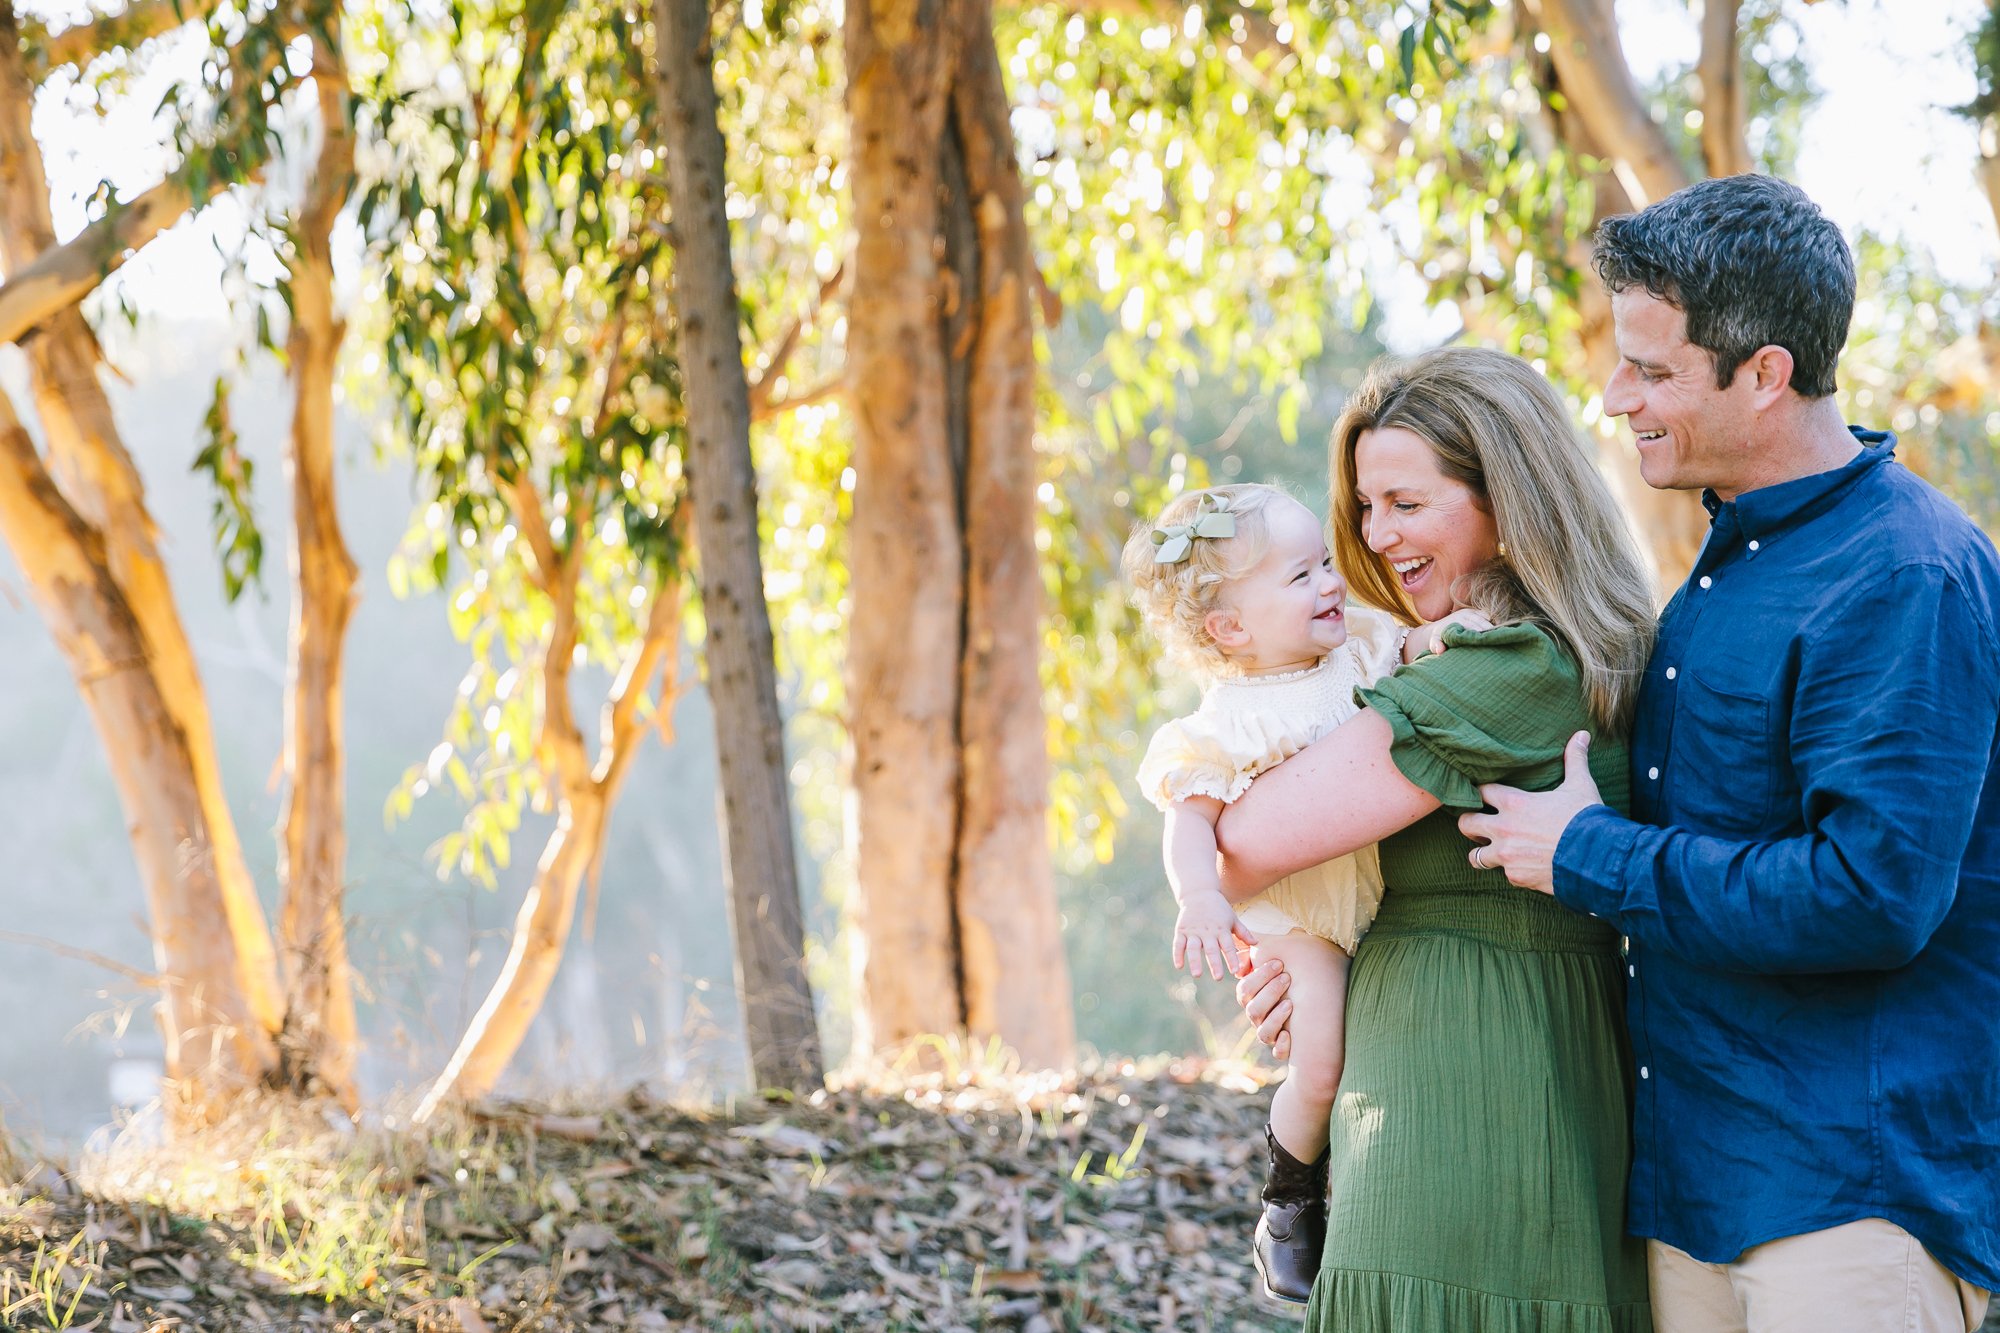 Los_Angeles_Family_Photographer_Golden_Hour_Mini_Session_Fall_Photos_Holiday_Card_Kids_Babies_Children_Luxury_Best_California_Photography-0732.jpg